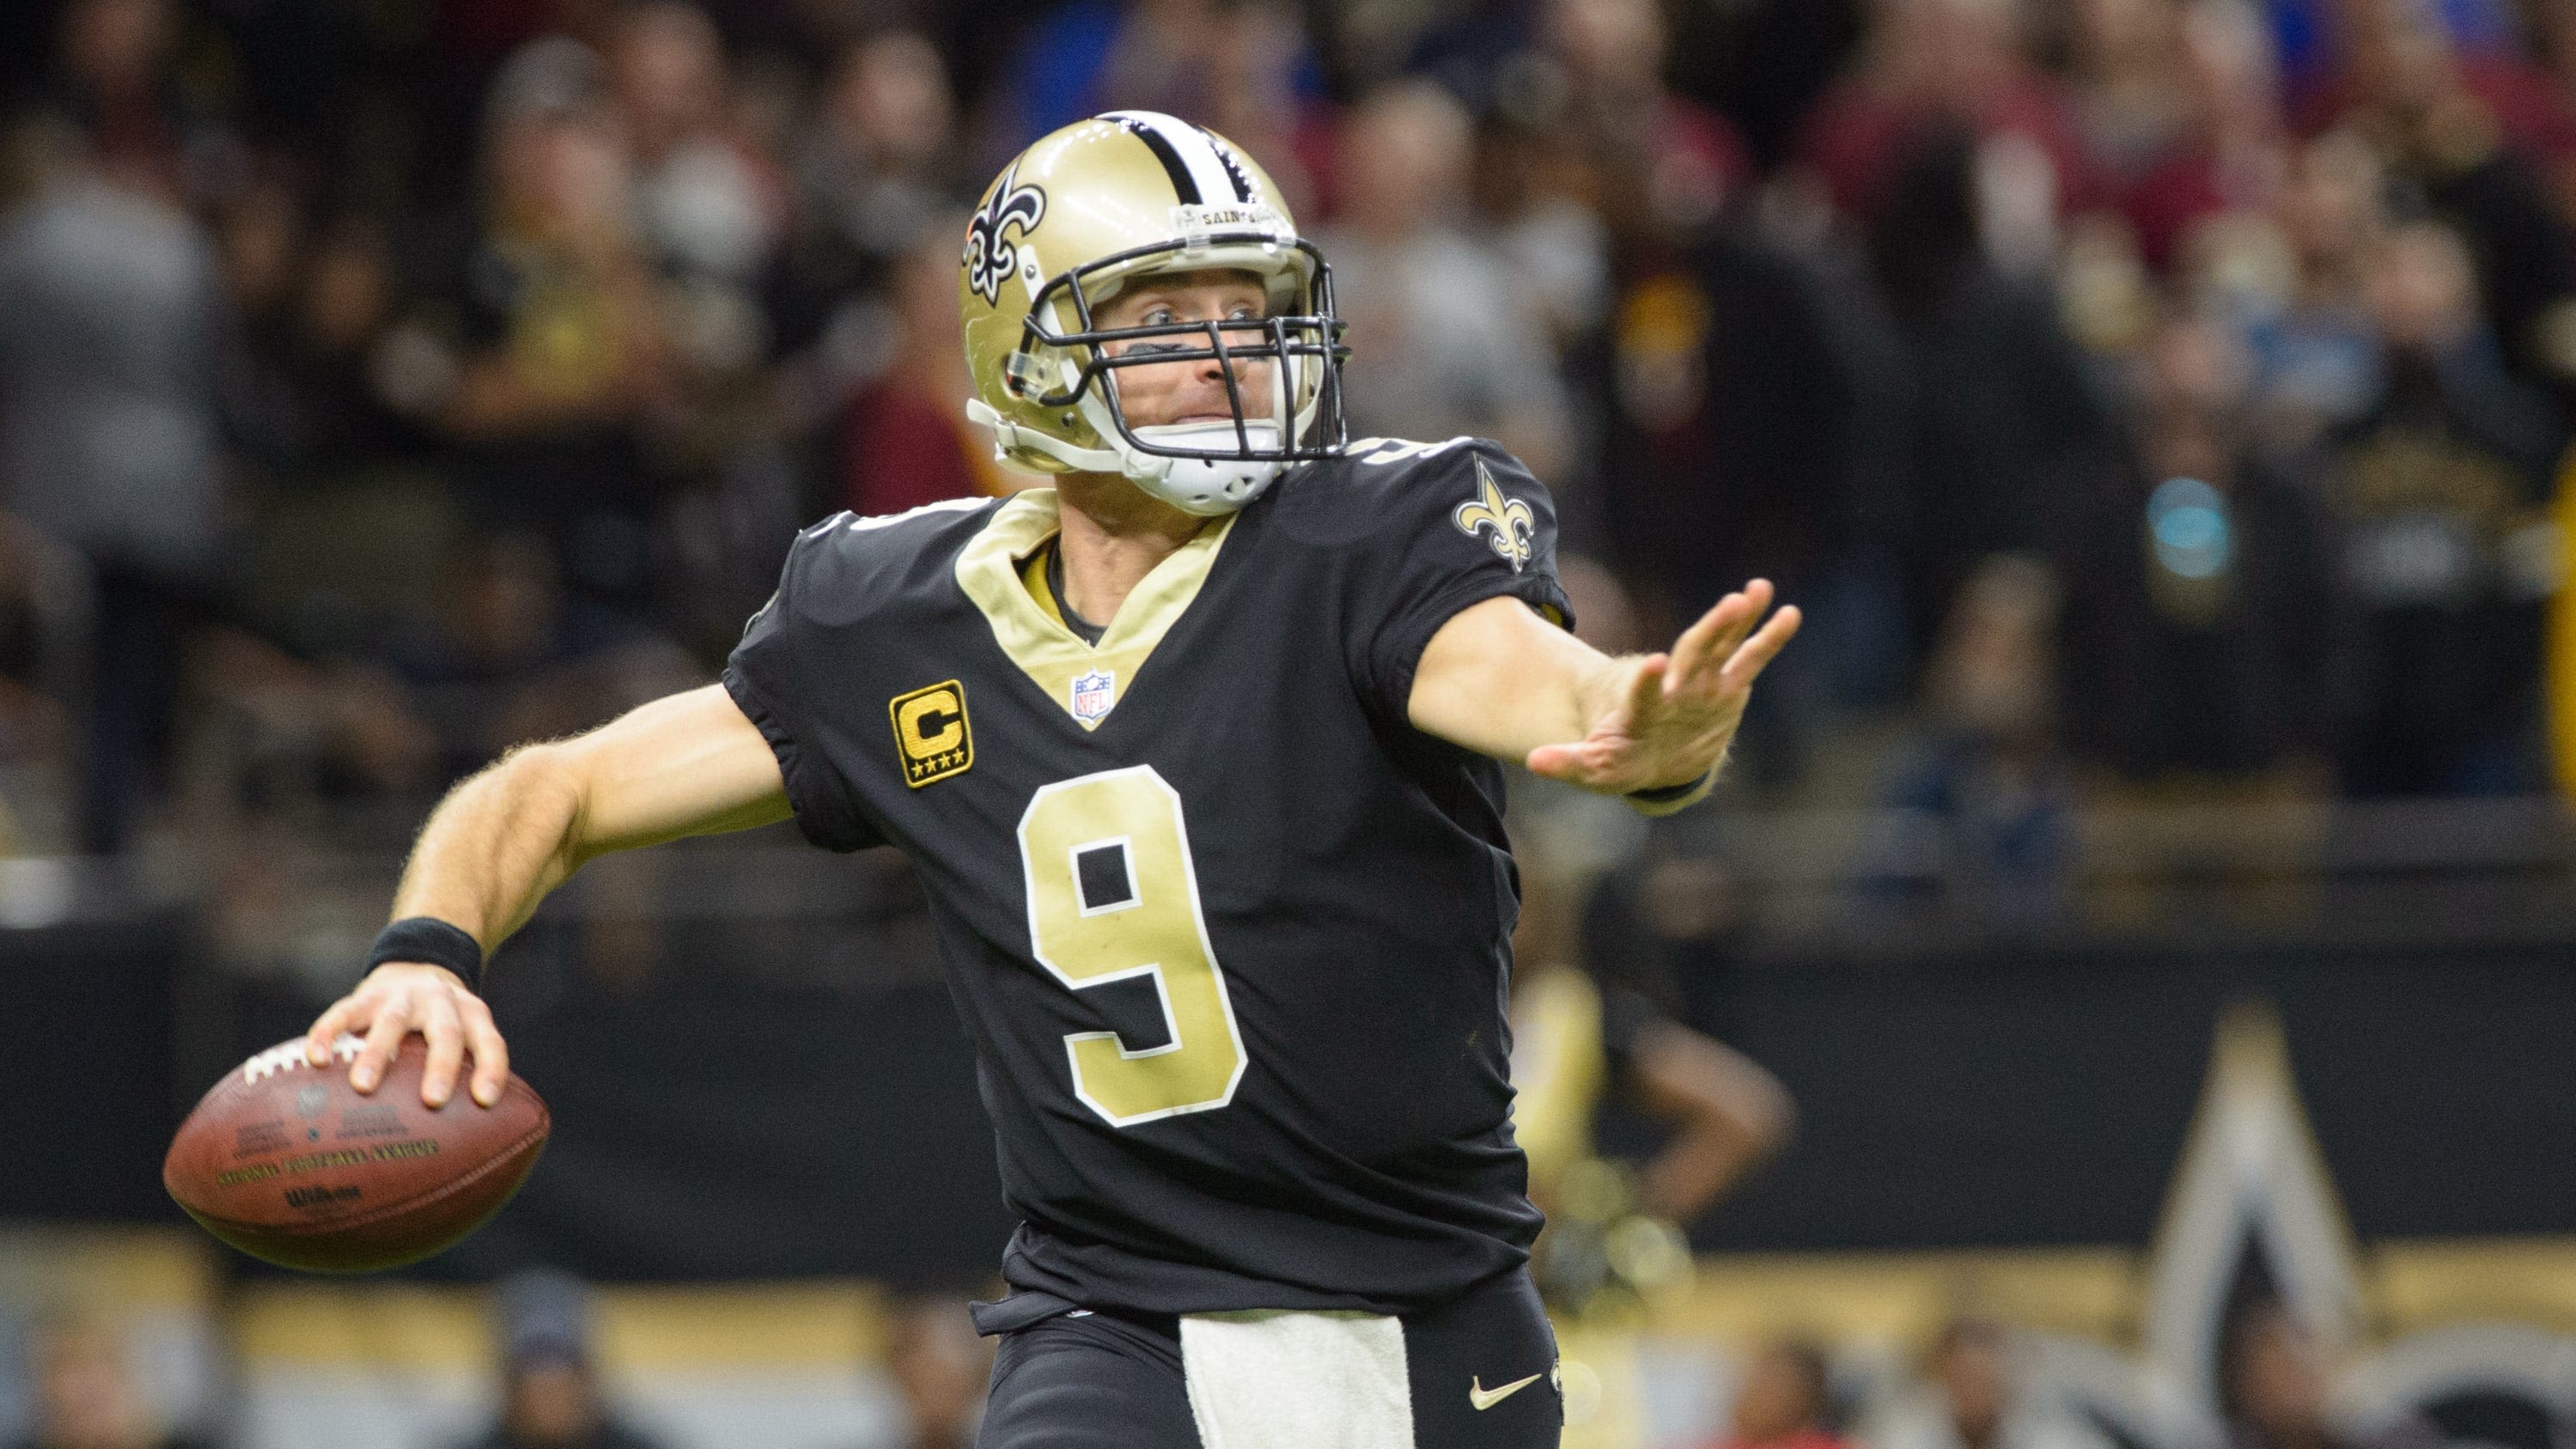 Drew Brees said he could have played another three years in NFL if not for arm trouble